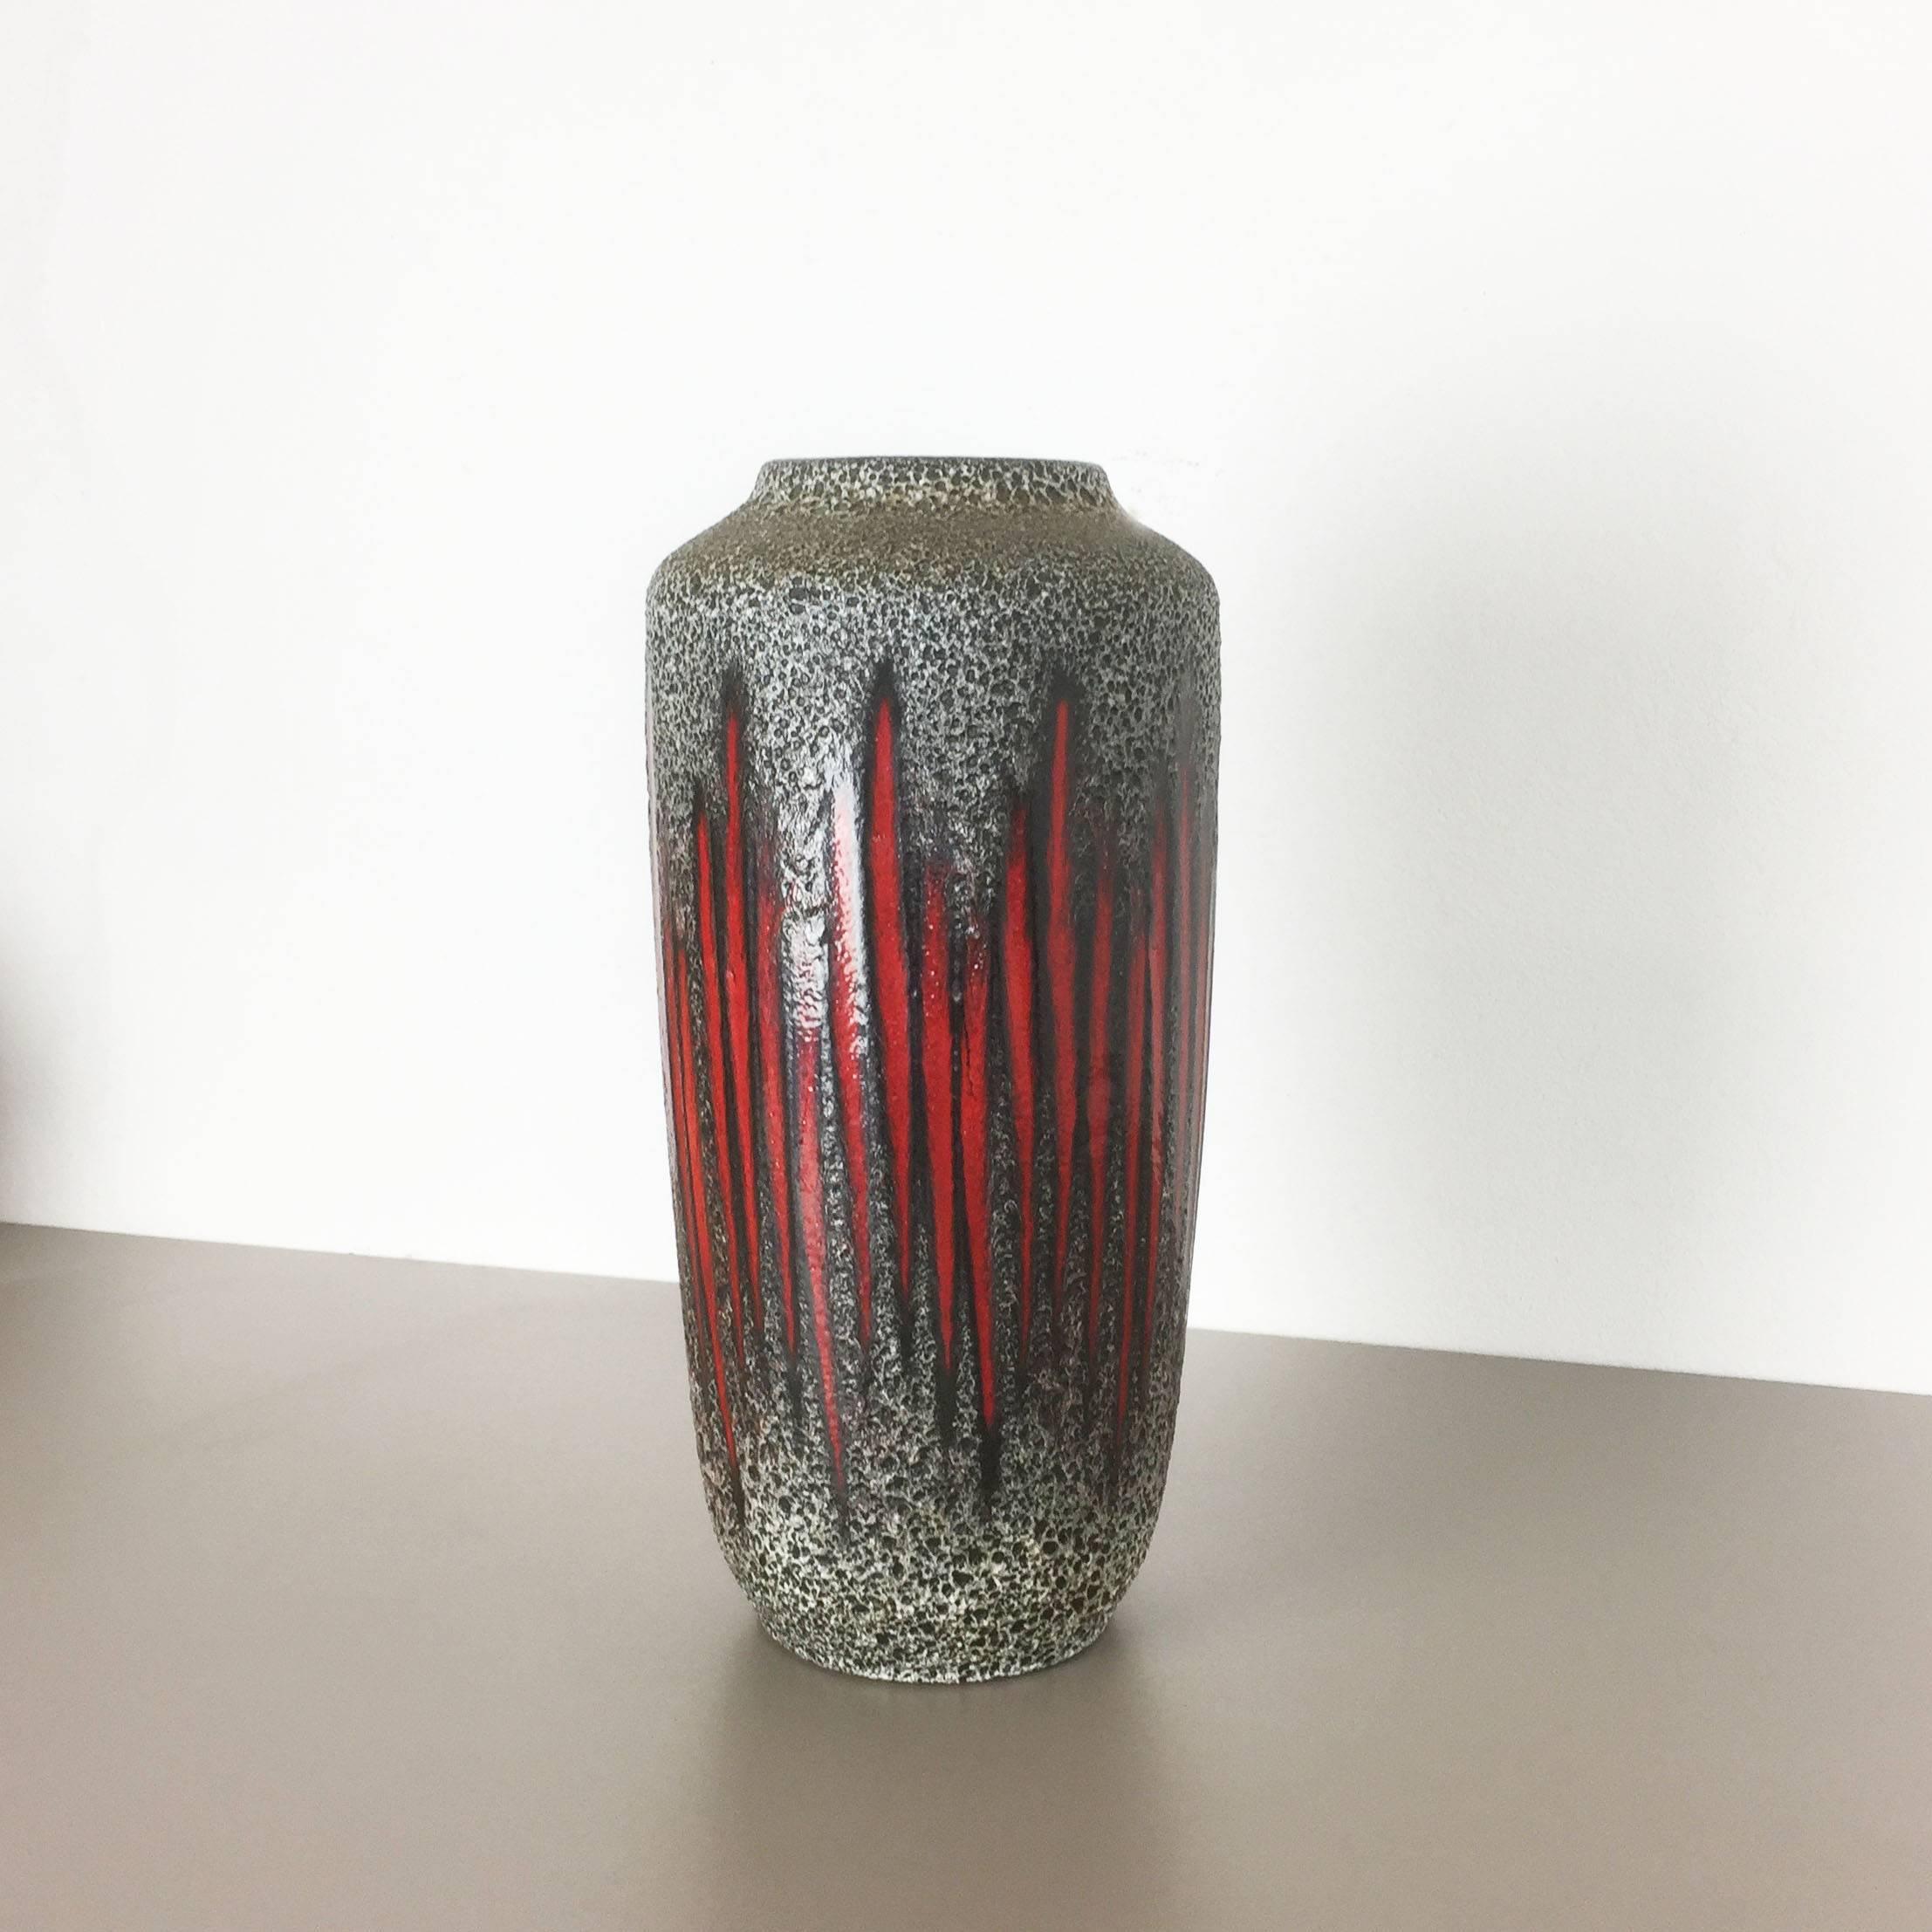 Article:

Extra large fat lava art vase. 

Measures: 45cm



Model: 

517 45



Producer:

Scheurich, Germany



Decade:

1970s


        

This original vintage vase was produced in the 1970s in Germany. it is made of